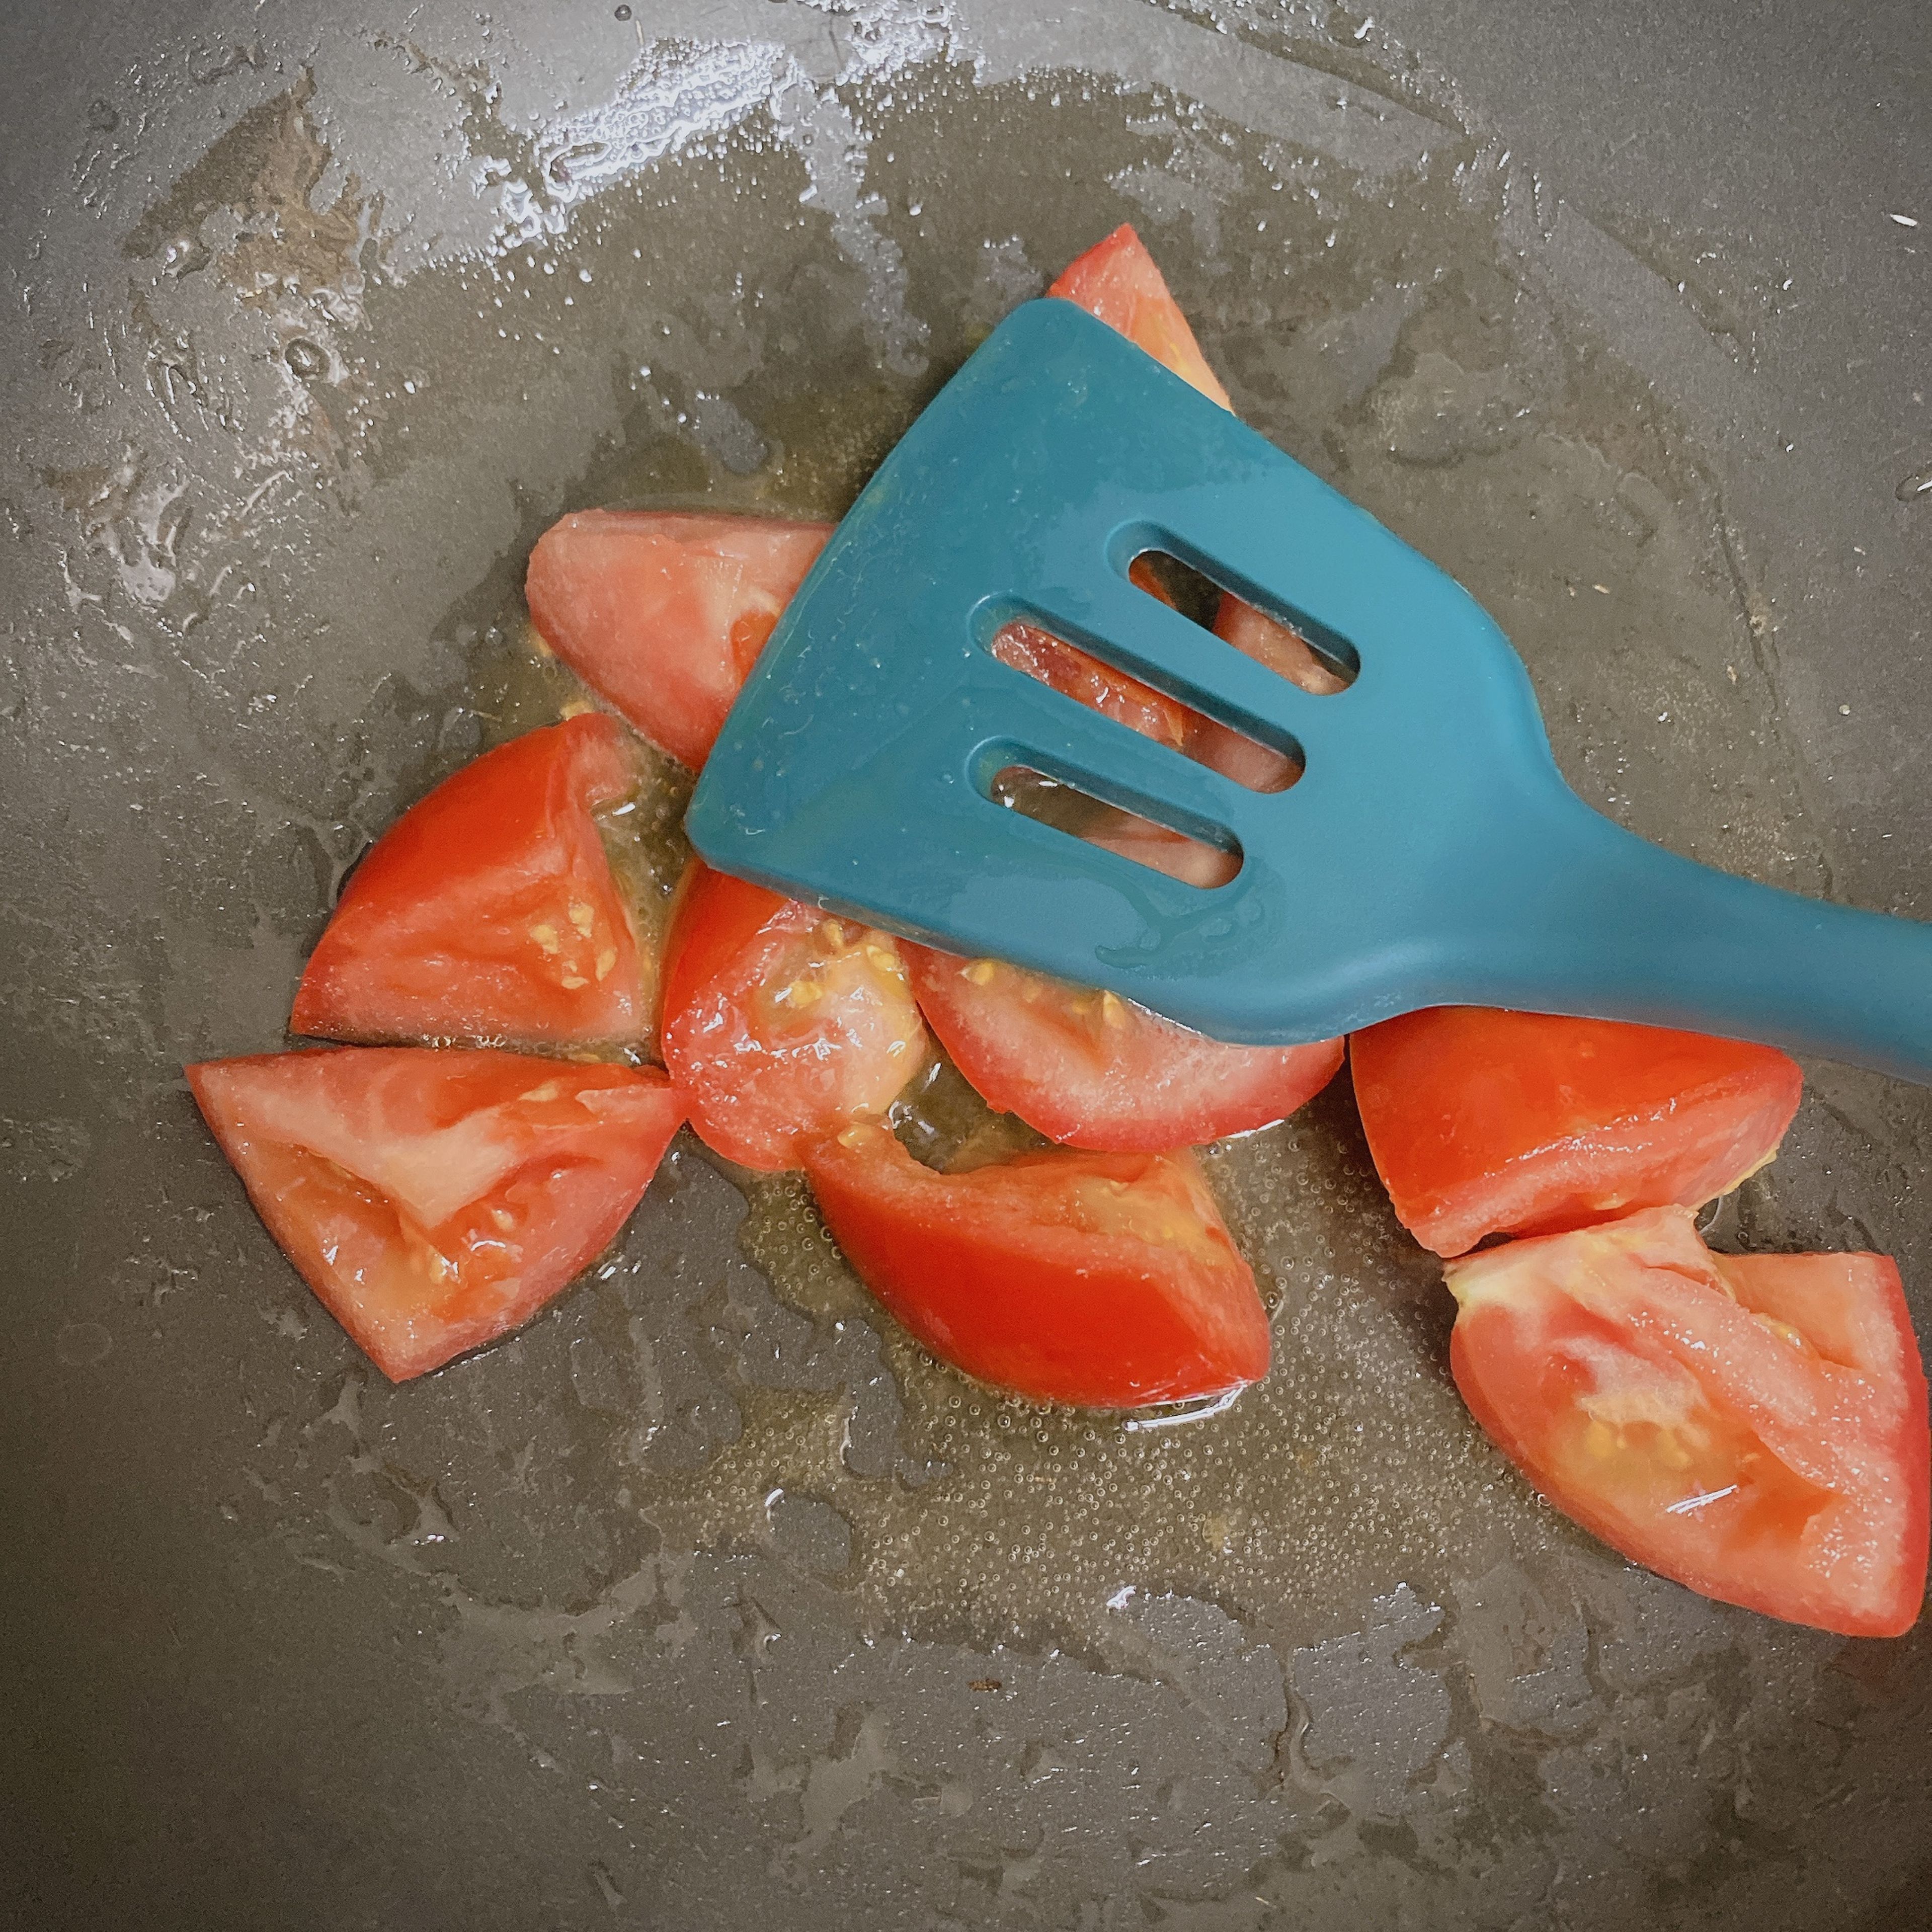 Heat up the oil and fry the tomatoes until the juice is sucked out